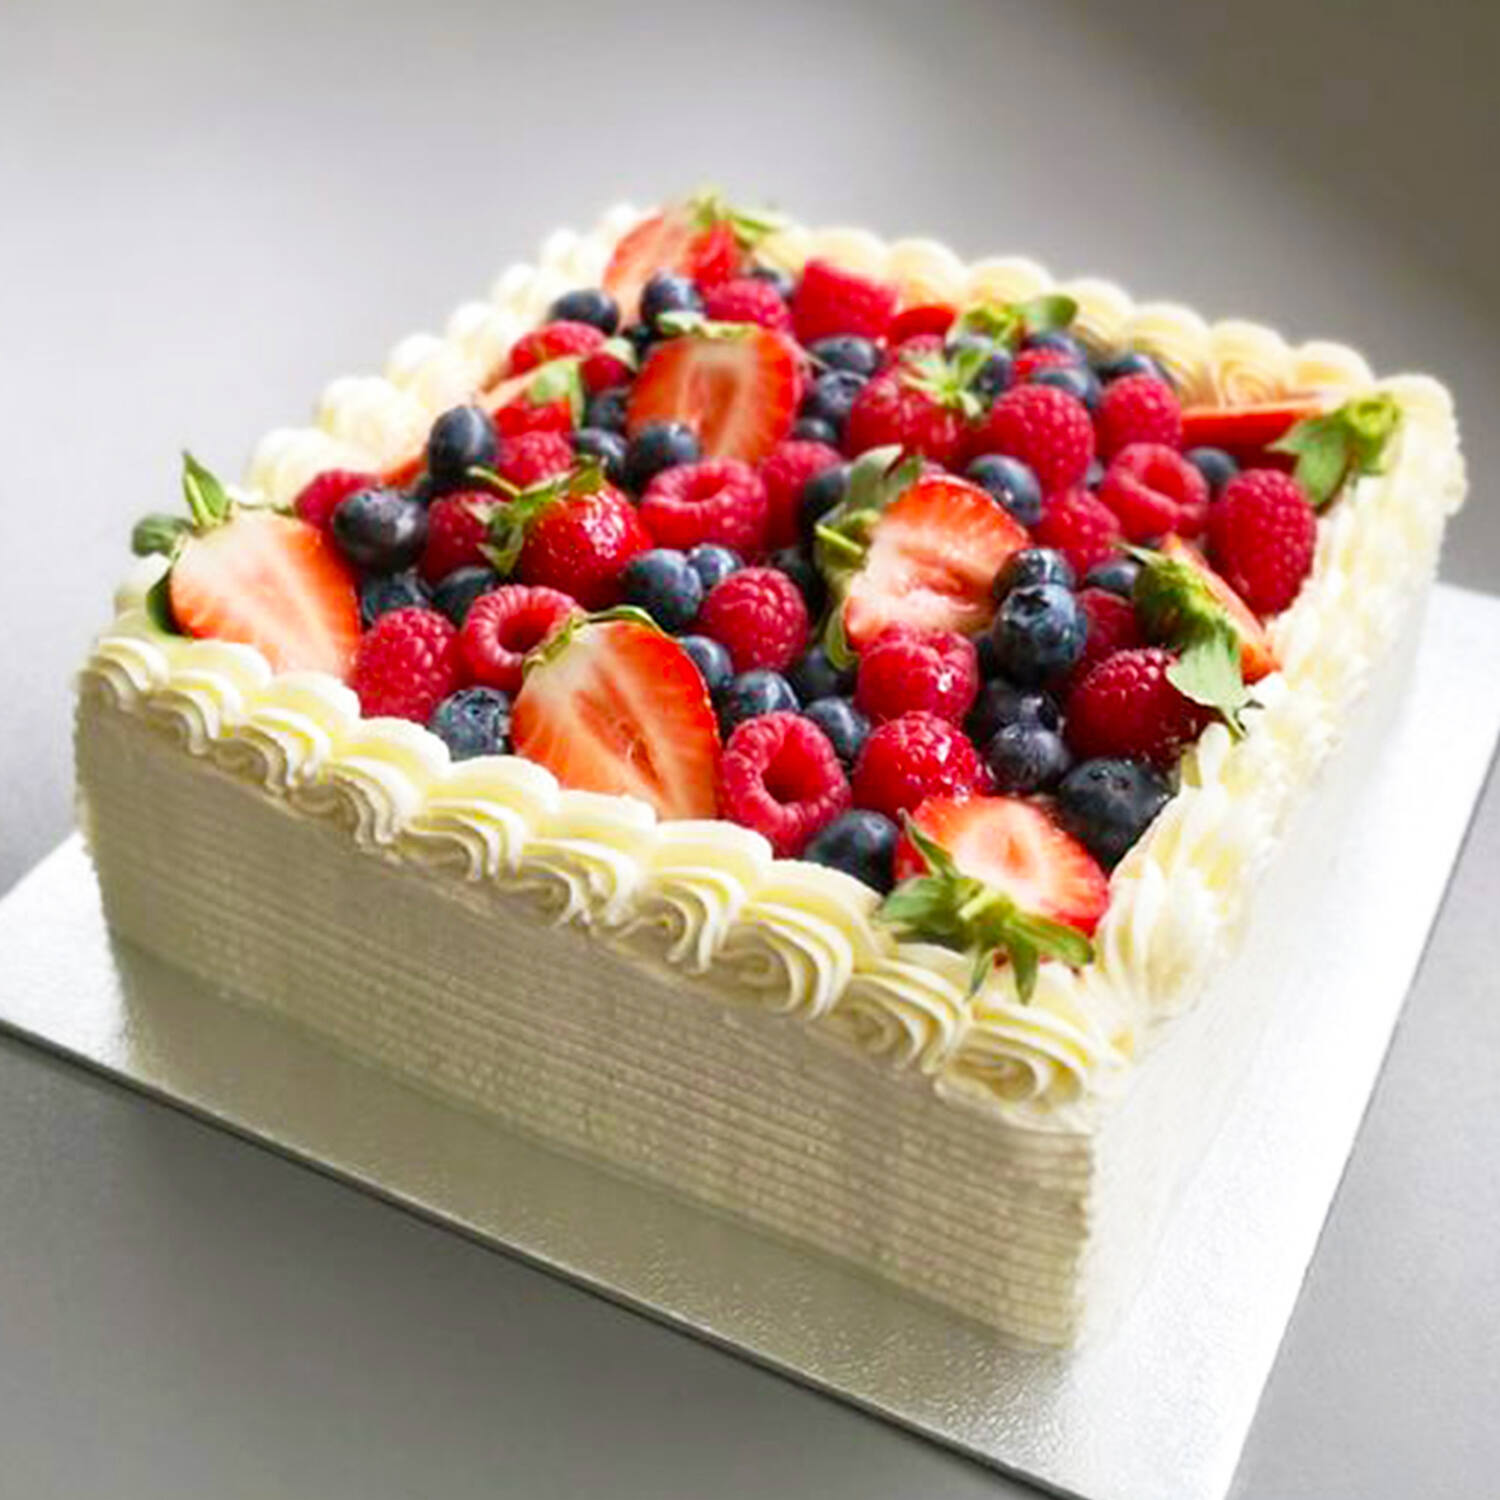 Share more than 70 2.5 kg cake best - in.daotaonec